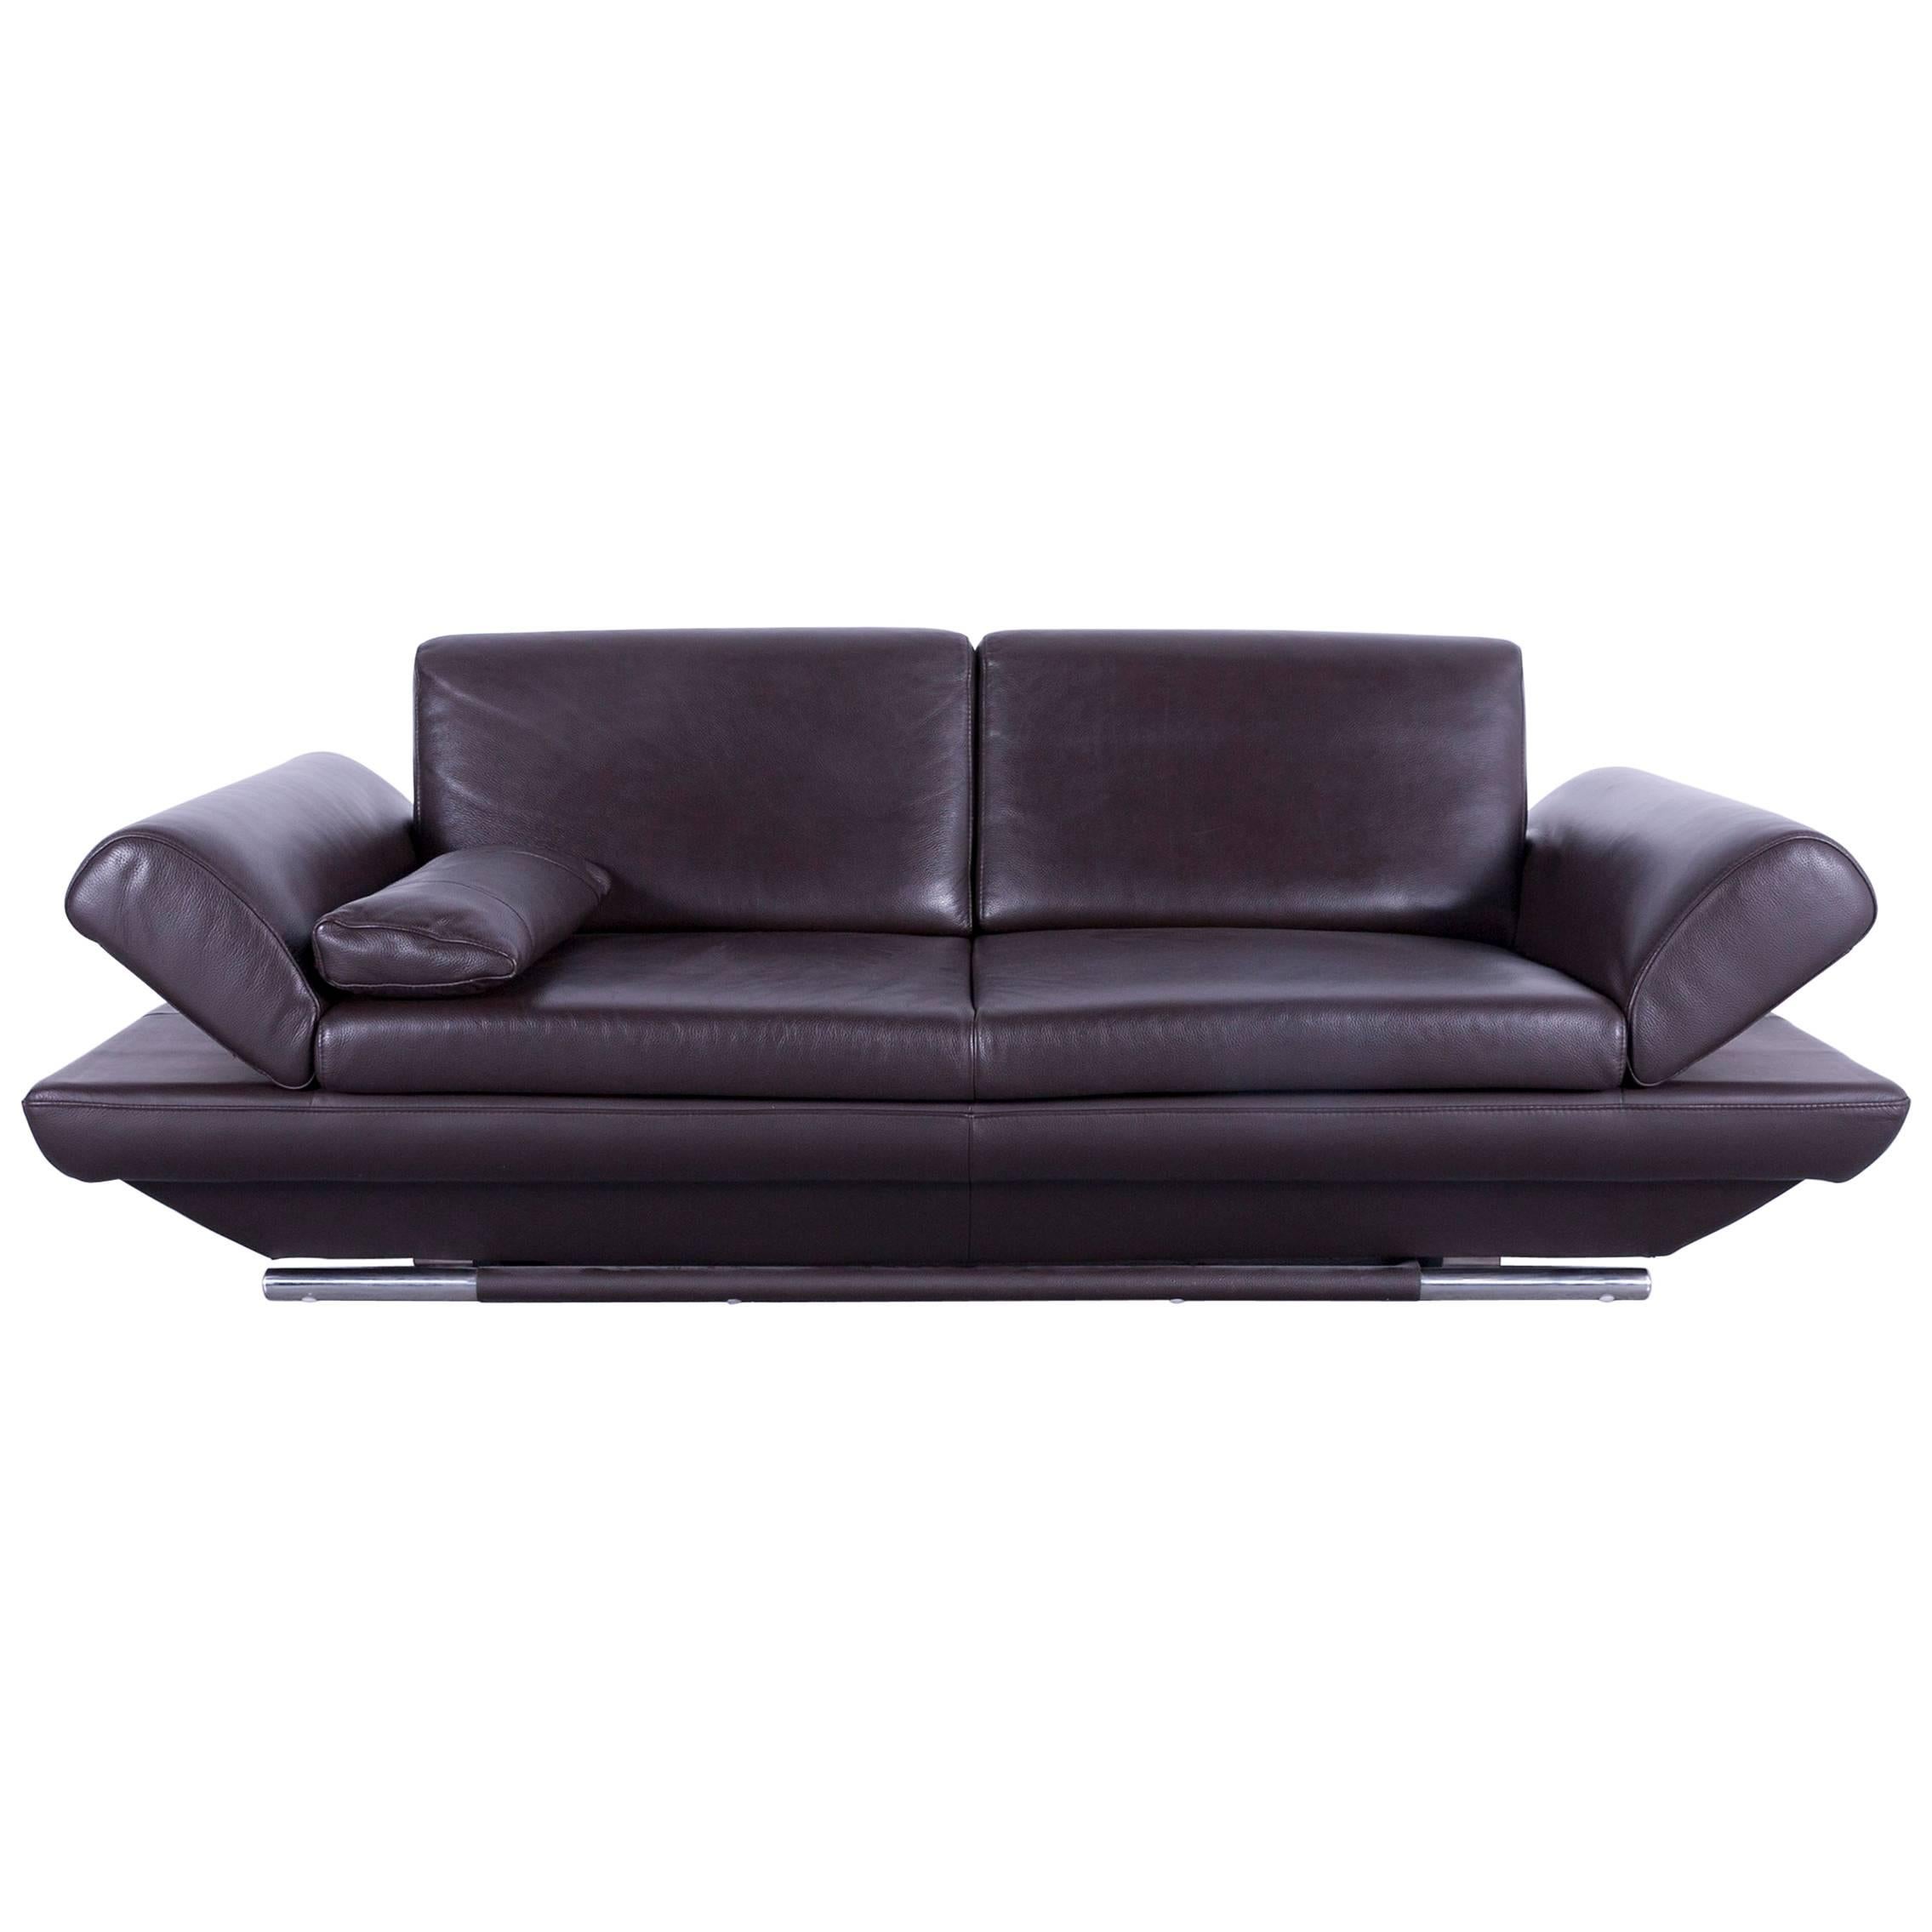 Gio Mano Leather Sofa Brown Two-Seat Function Couch